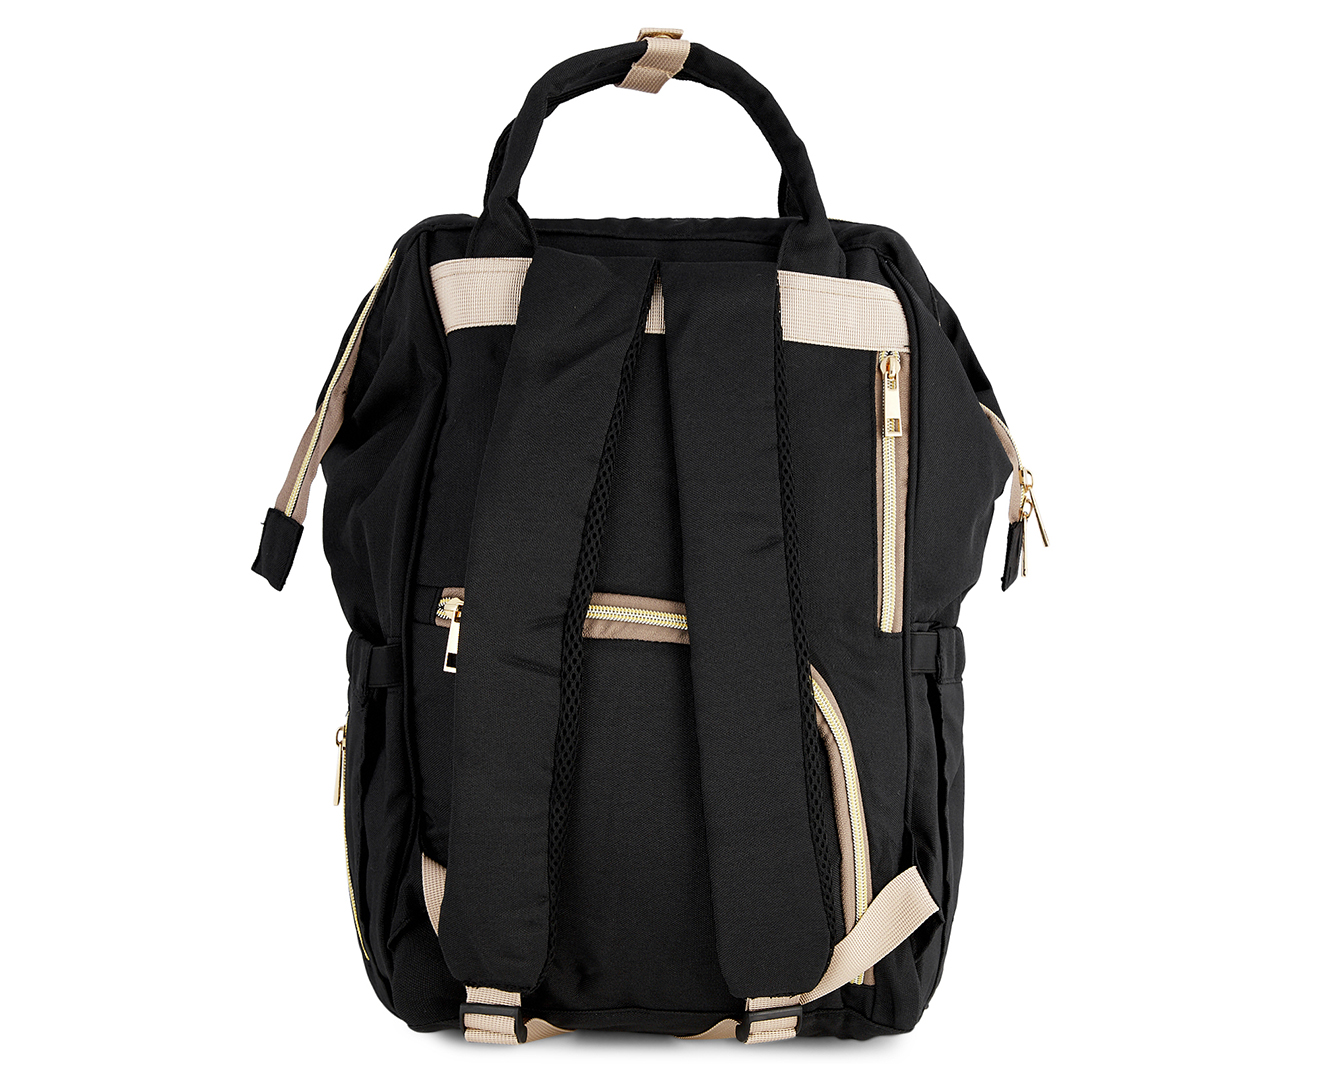 Kate Hill Baby Maternity Nappy Bag Backpack - Black | Catch.com.au